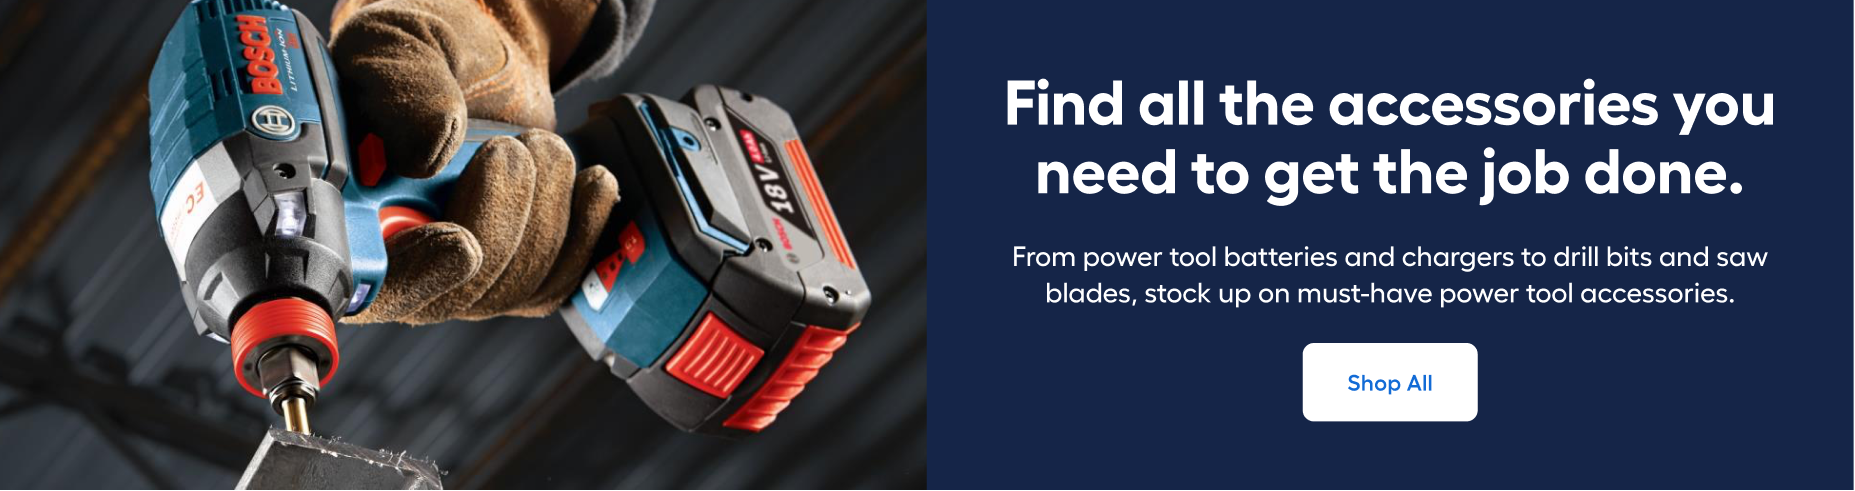 Jig Saw Blades - Power Tools Accessories